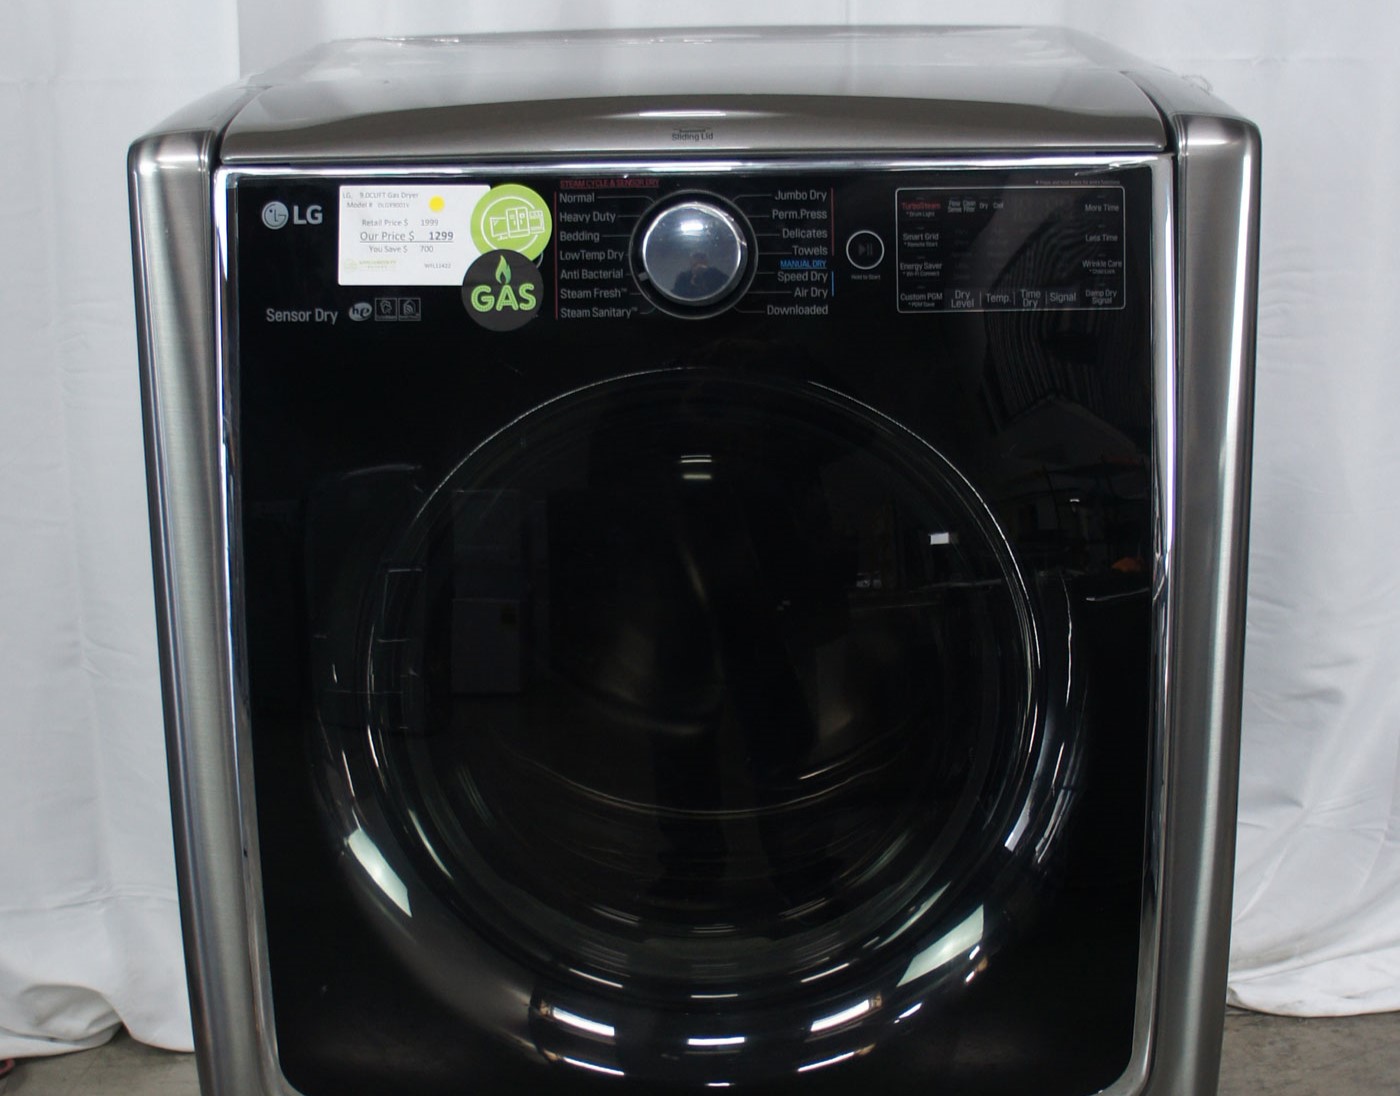 How To Fix The Error Code F4 For LG Dryer